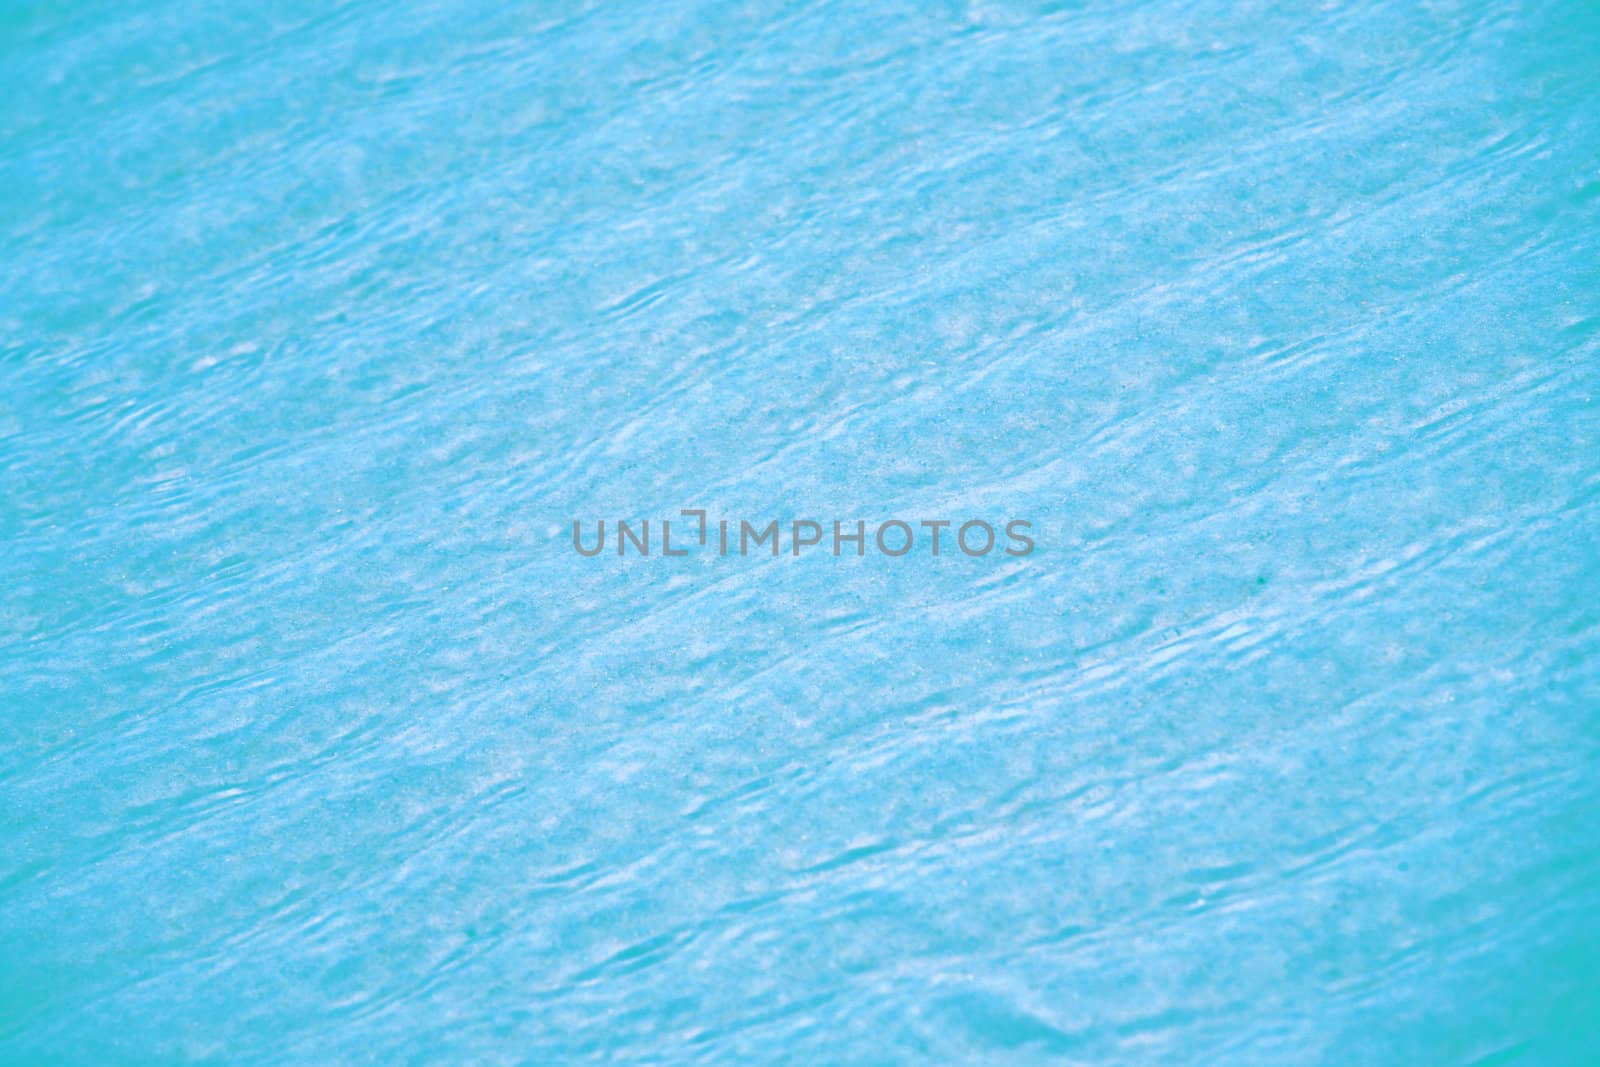 Soft Blue ripples of water over sandy bottom